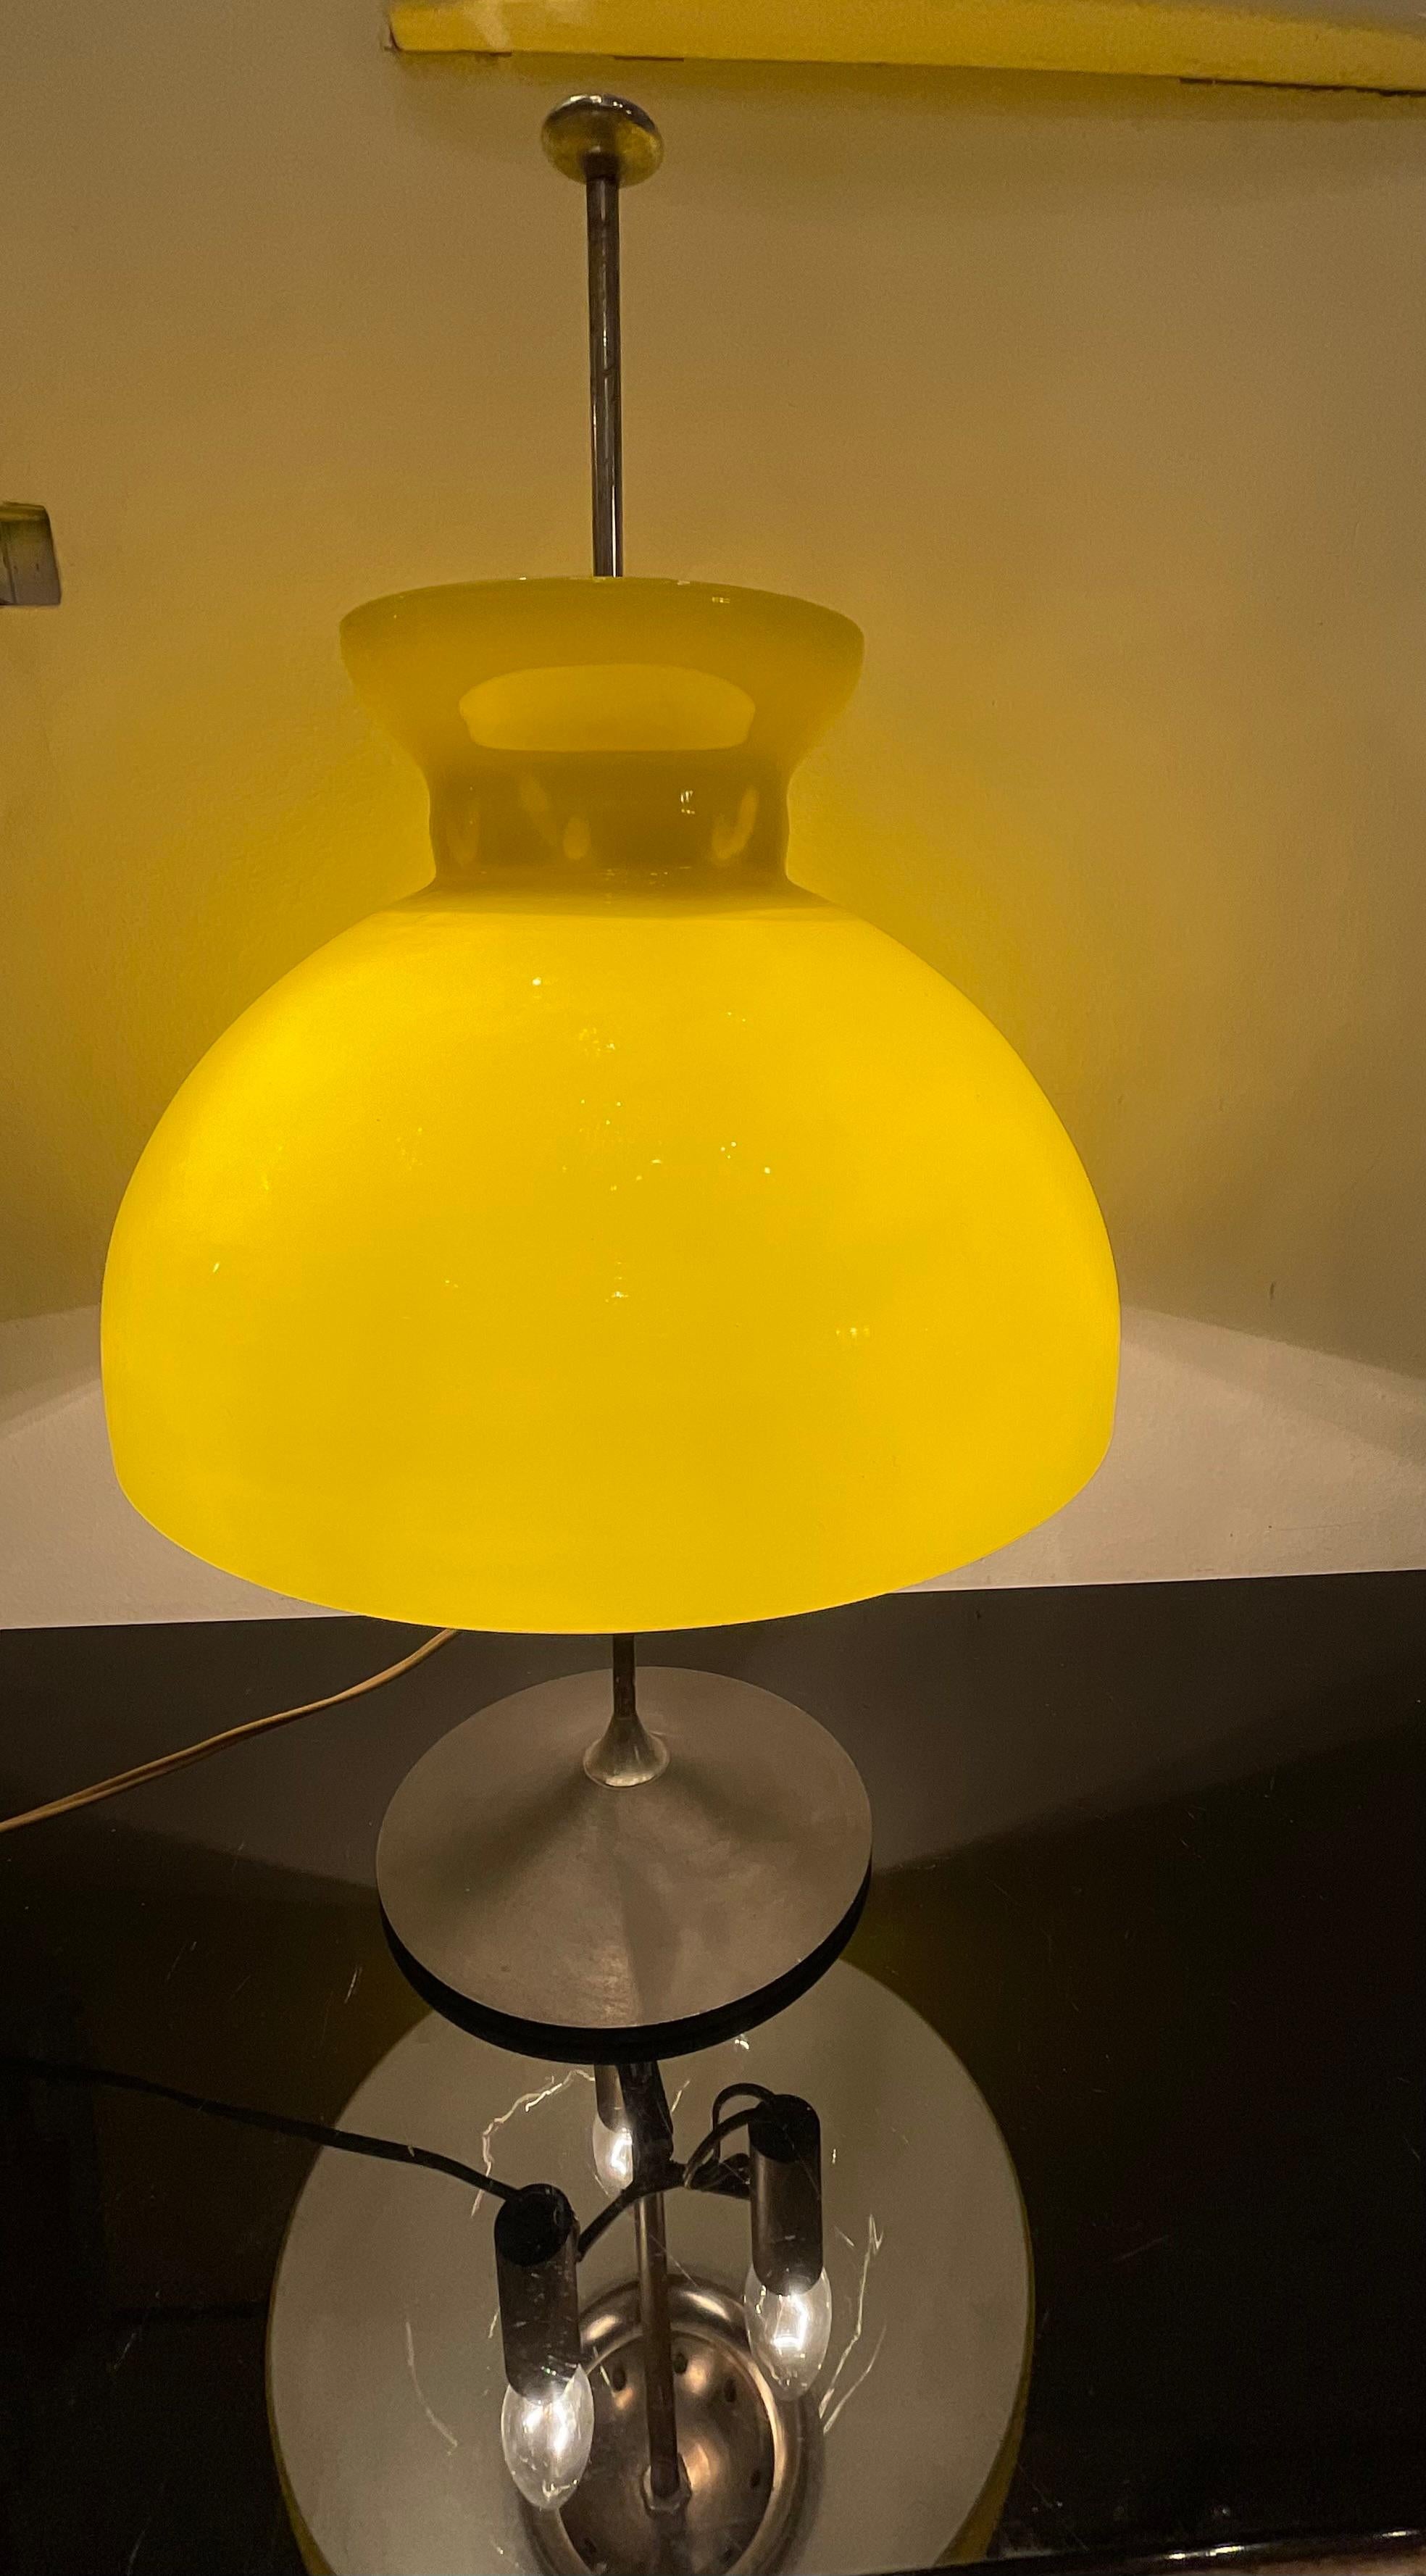 A lamp by the firm STILUX, produced in the 1950s, in ITALY, its lampshade is made of yellow-enameled murano glass on the outside and white on the inside.
The metal and chrome frame has a button that when pressed allows the glass shade to be raised